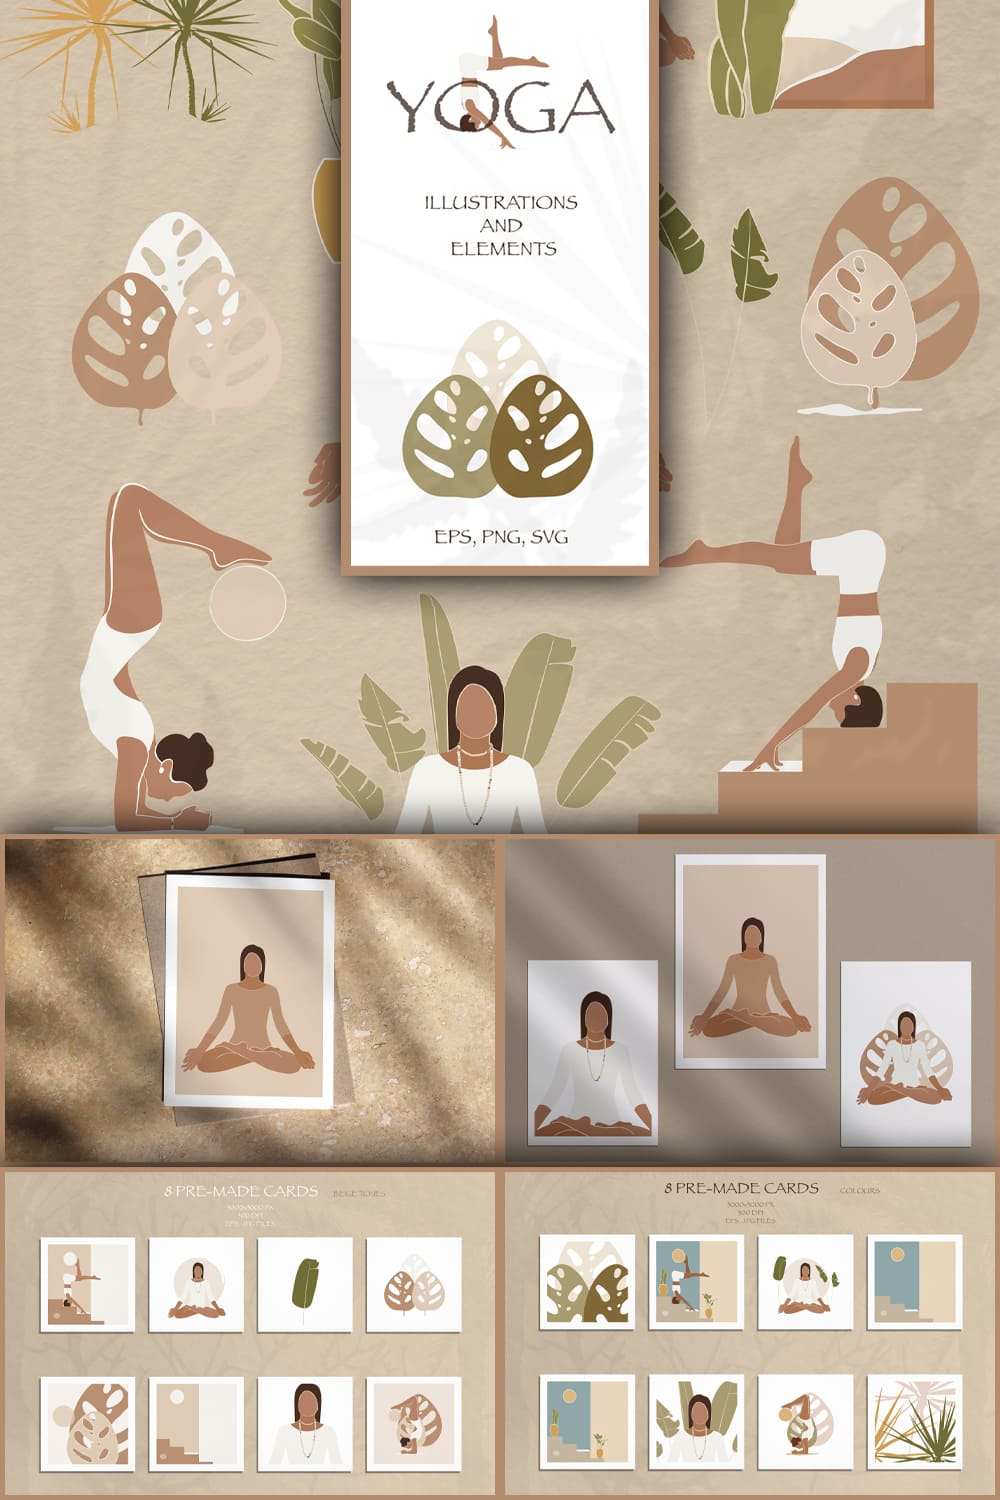 Yoga abstract graphic collection - pinterest image preview.